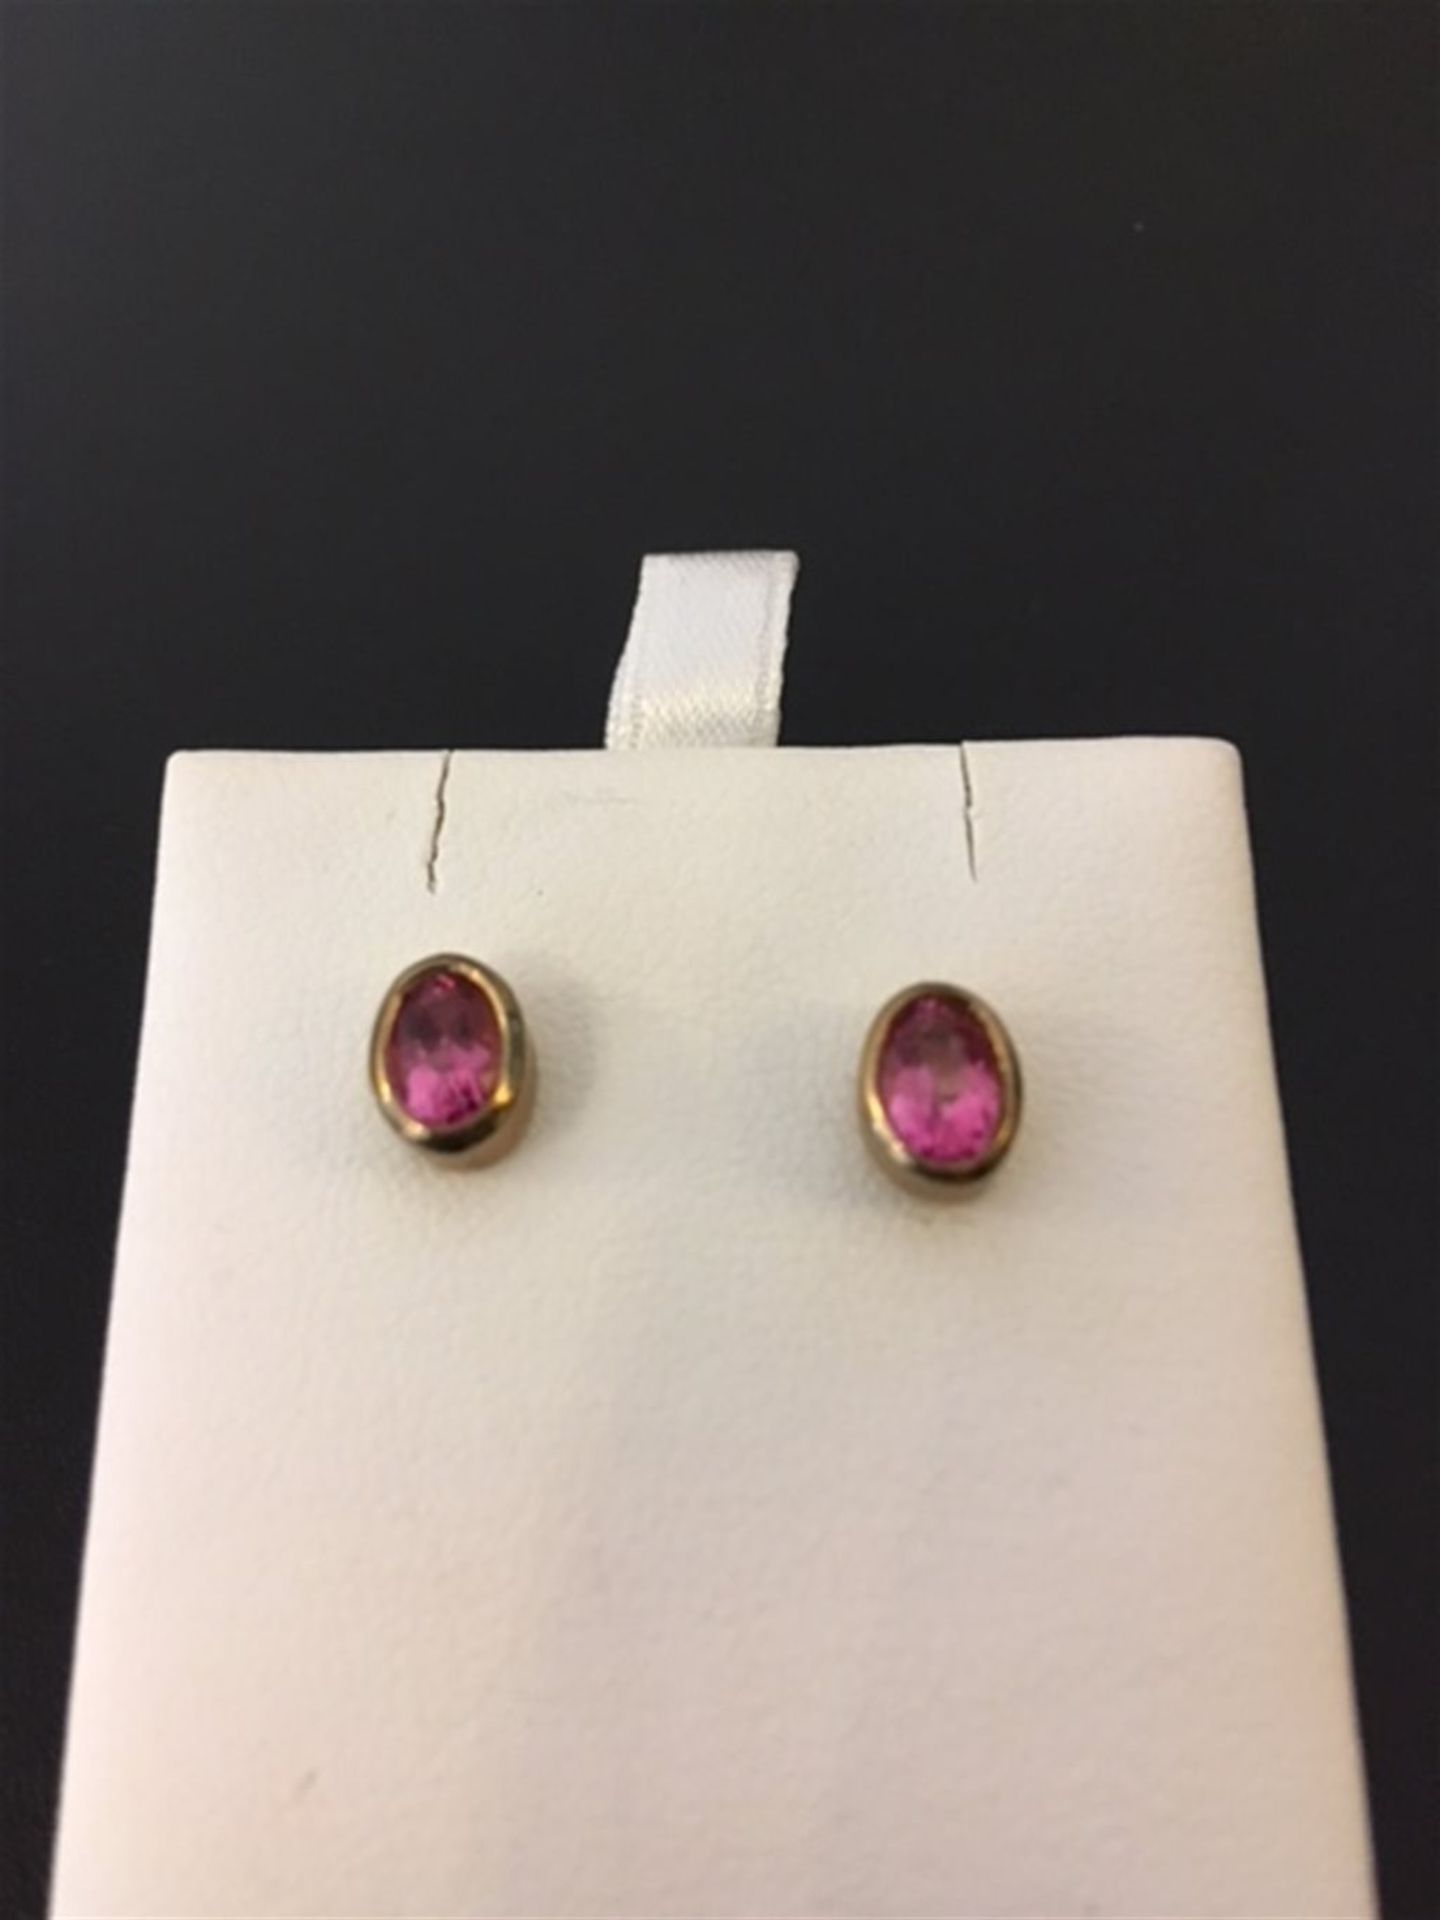 Gold & Pink Topaz earrings - Image 2 of 2